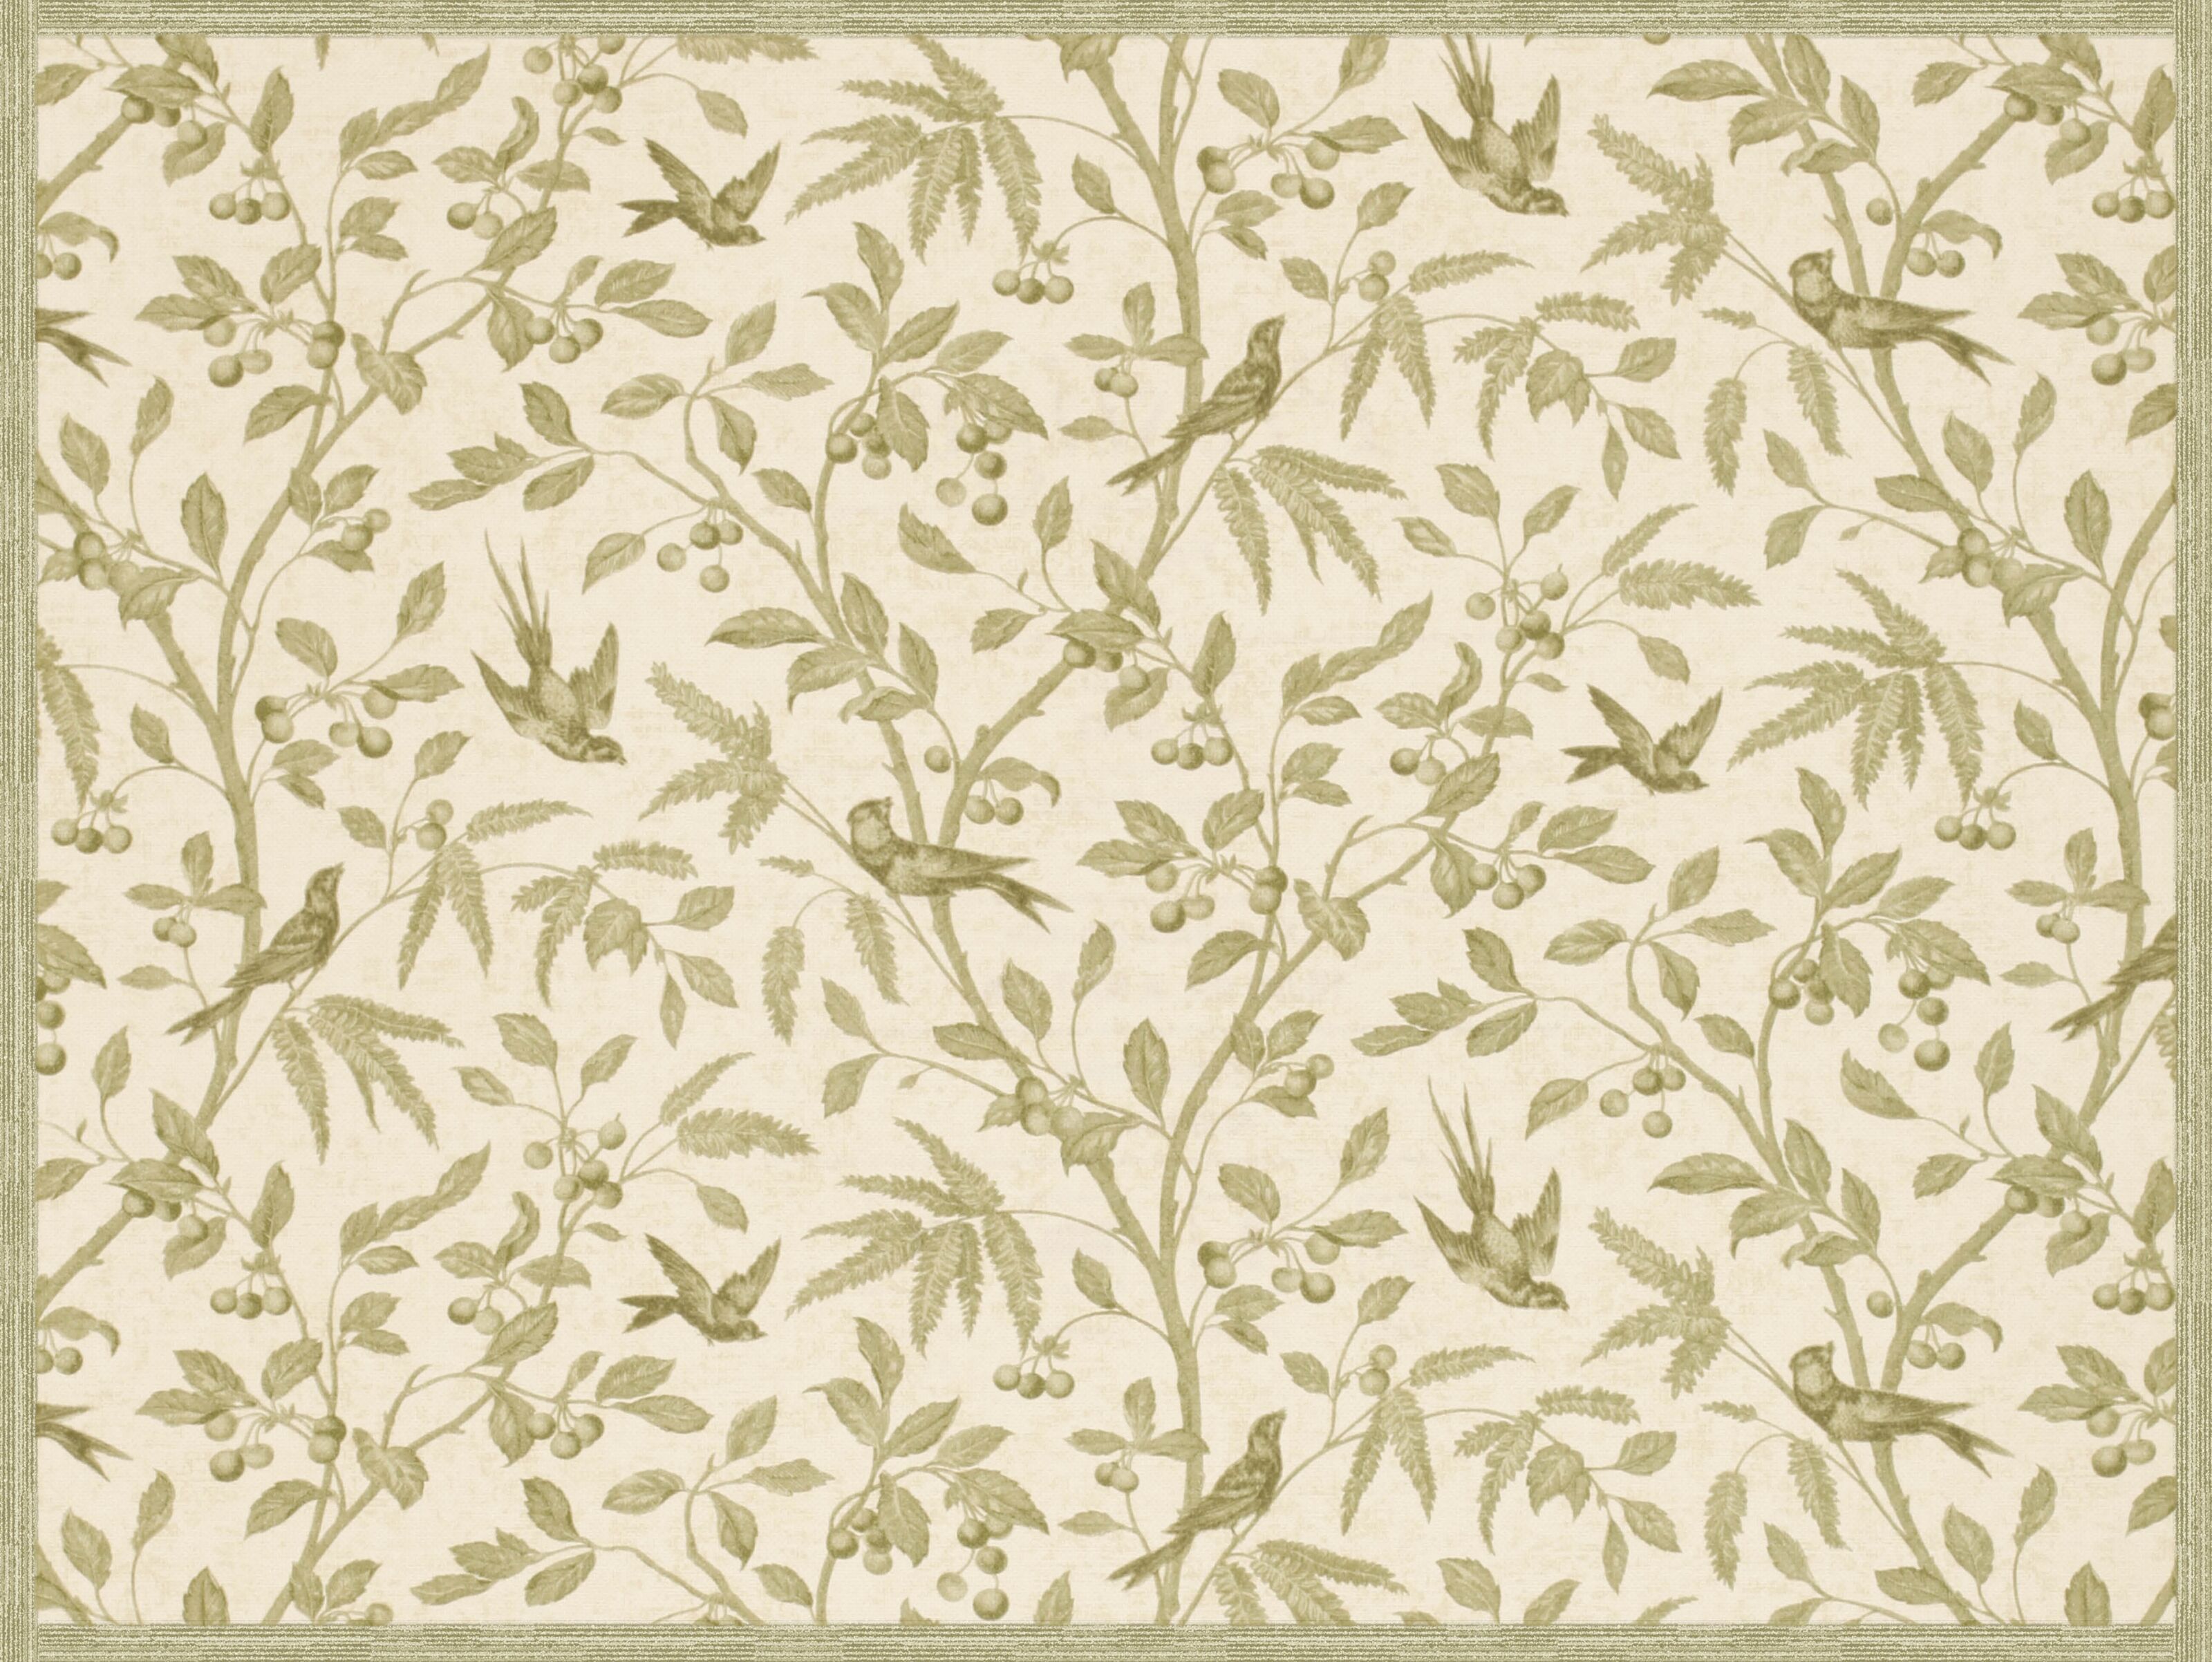 Buy wholesale Placemats | Washable placemats - beige branches and birds